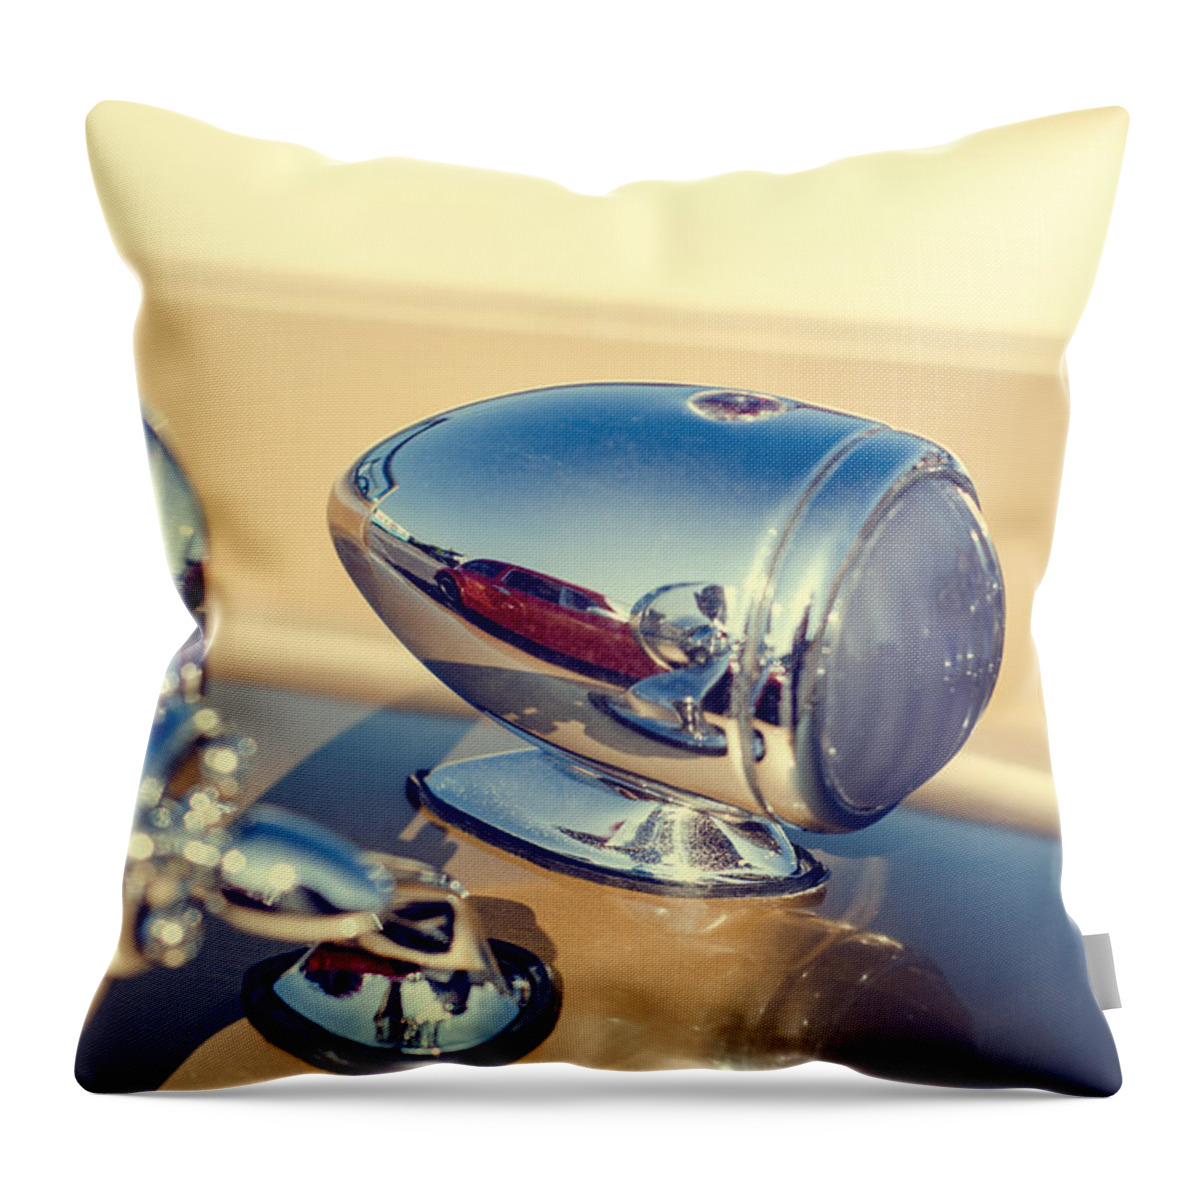 Design Throw Pillow featuring the photograph Jaguar by Spikey Mouse Photography